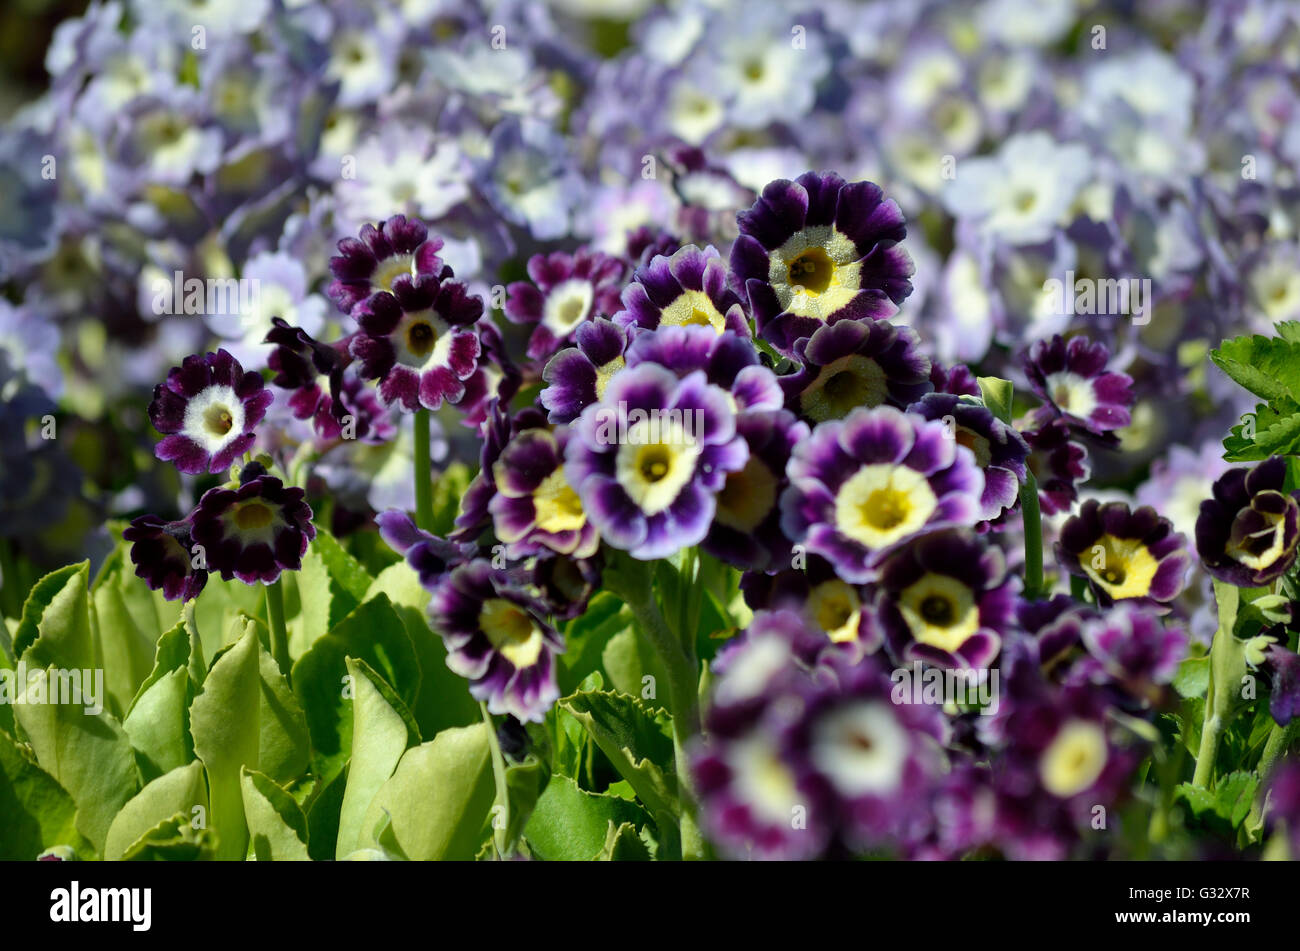 beautiful violet, yellow and purple primula x, pubescens flowers blooming in summer sunshine Stock Photo